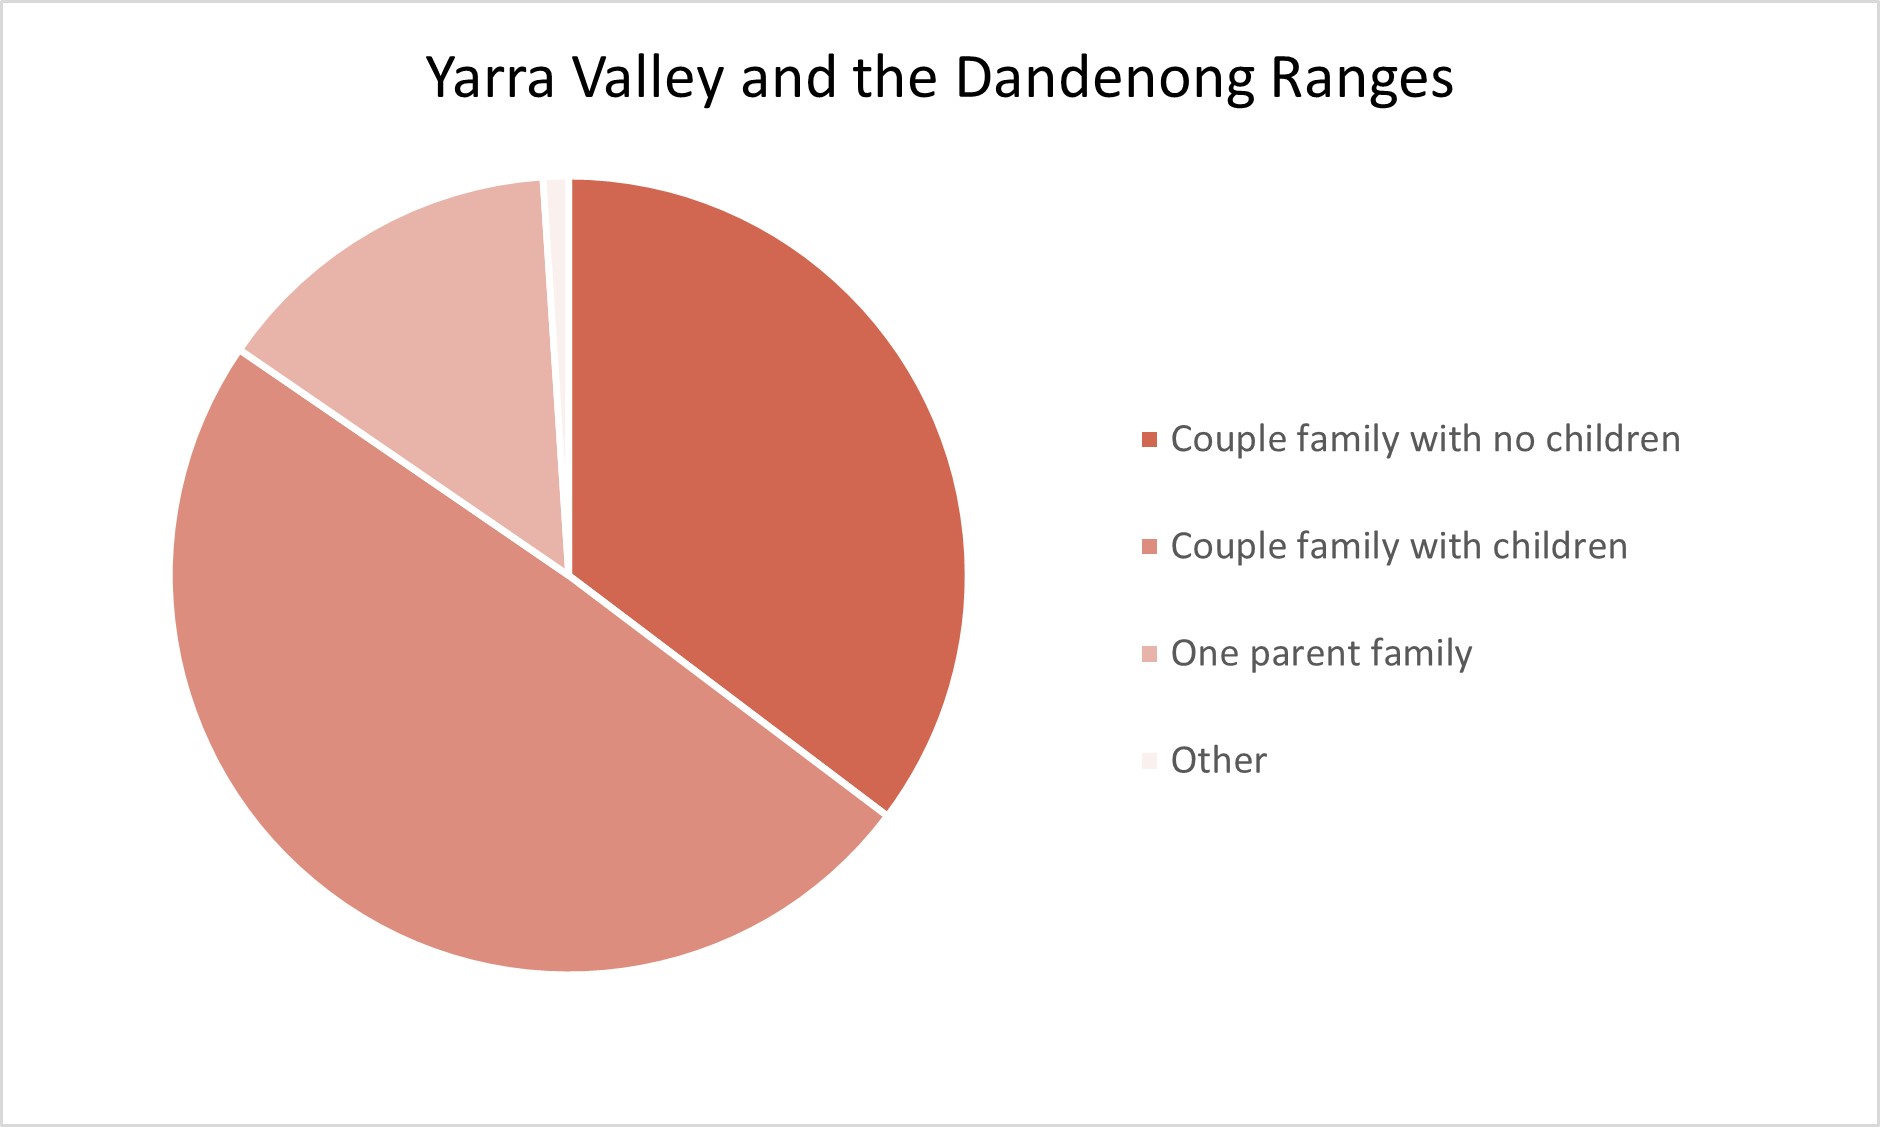 Yarra Valley and the Dandenong Ranges Adelaide Hills Population Statistics